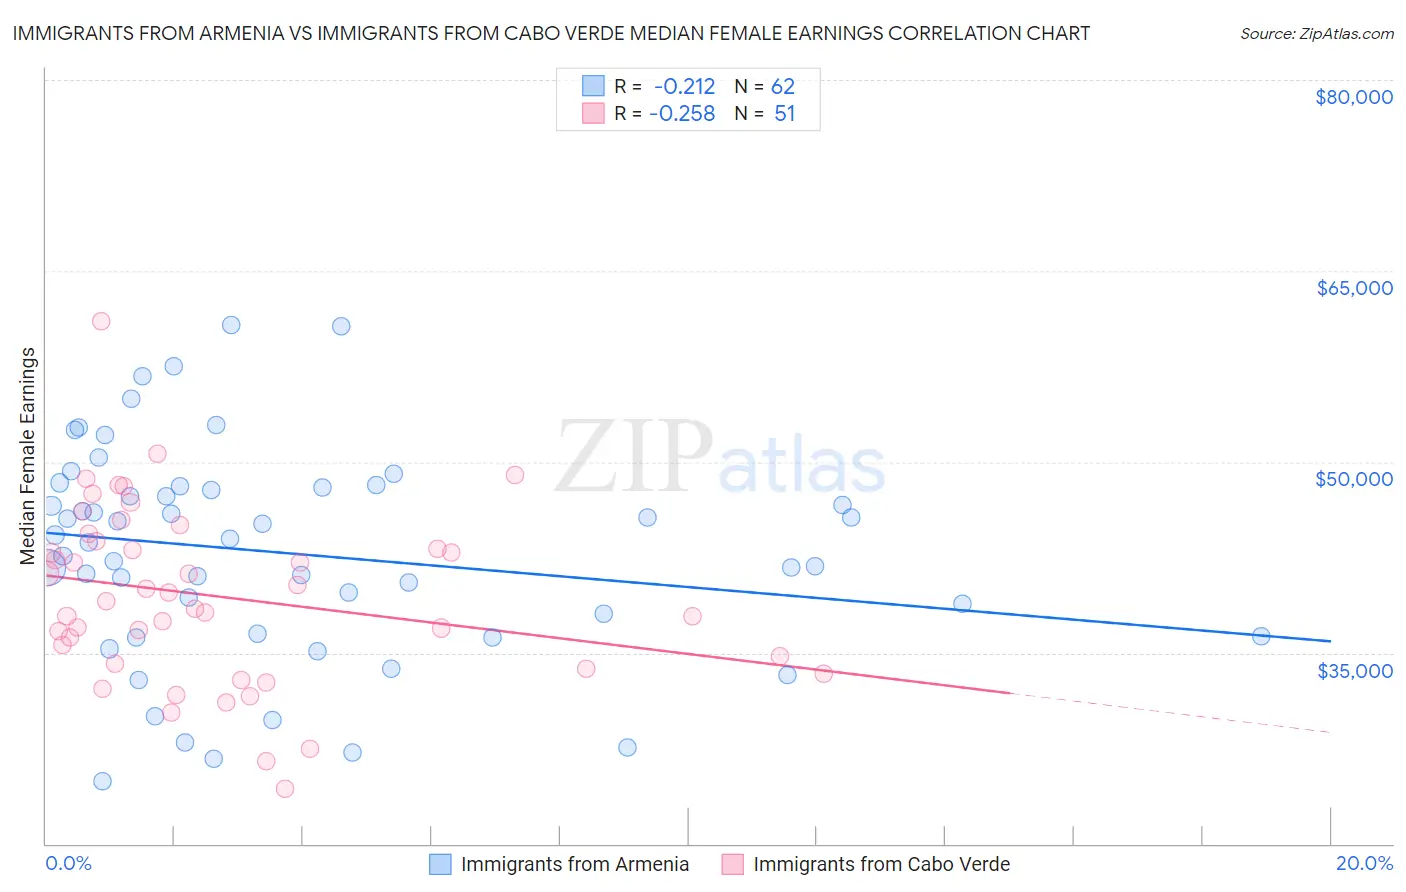 Immigrants from Armenia vs Immigrants from Cabo Verde Median Female Earnings